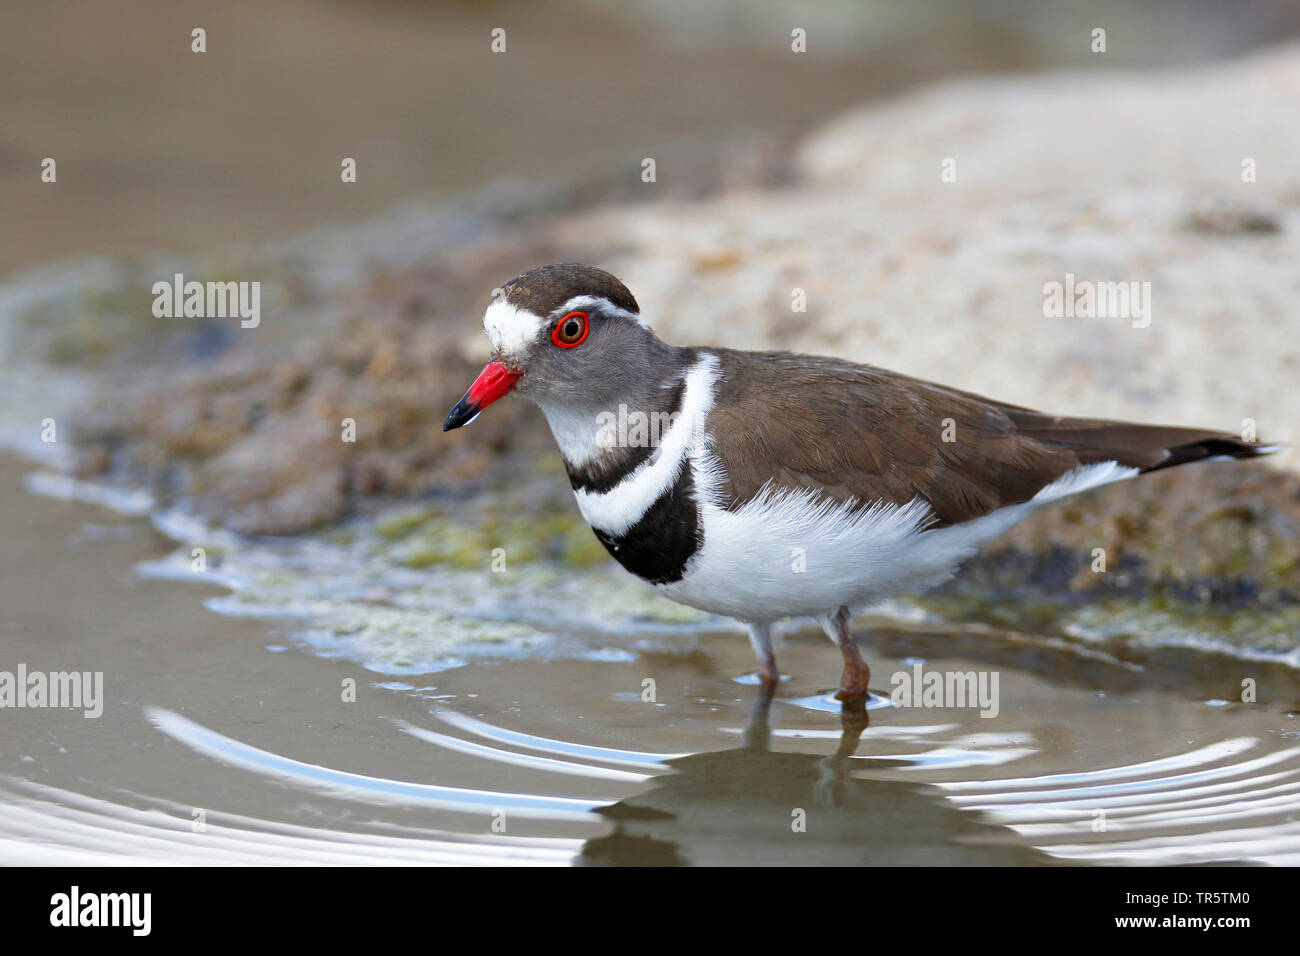 three-banded plover (Charadrius tricollaris), standing in shallow water in the river valley, side view, South Africa, Mpumalanga, Kruger National Park Stock Photo